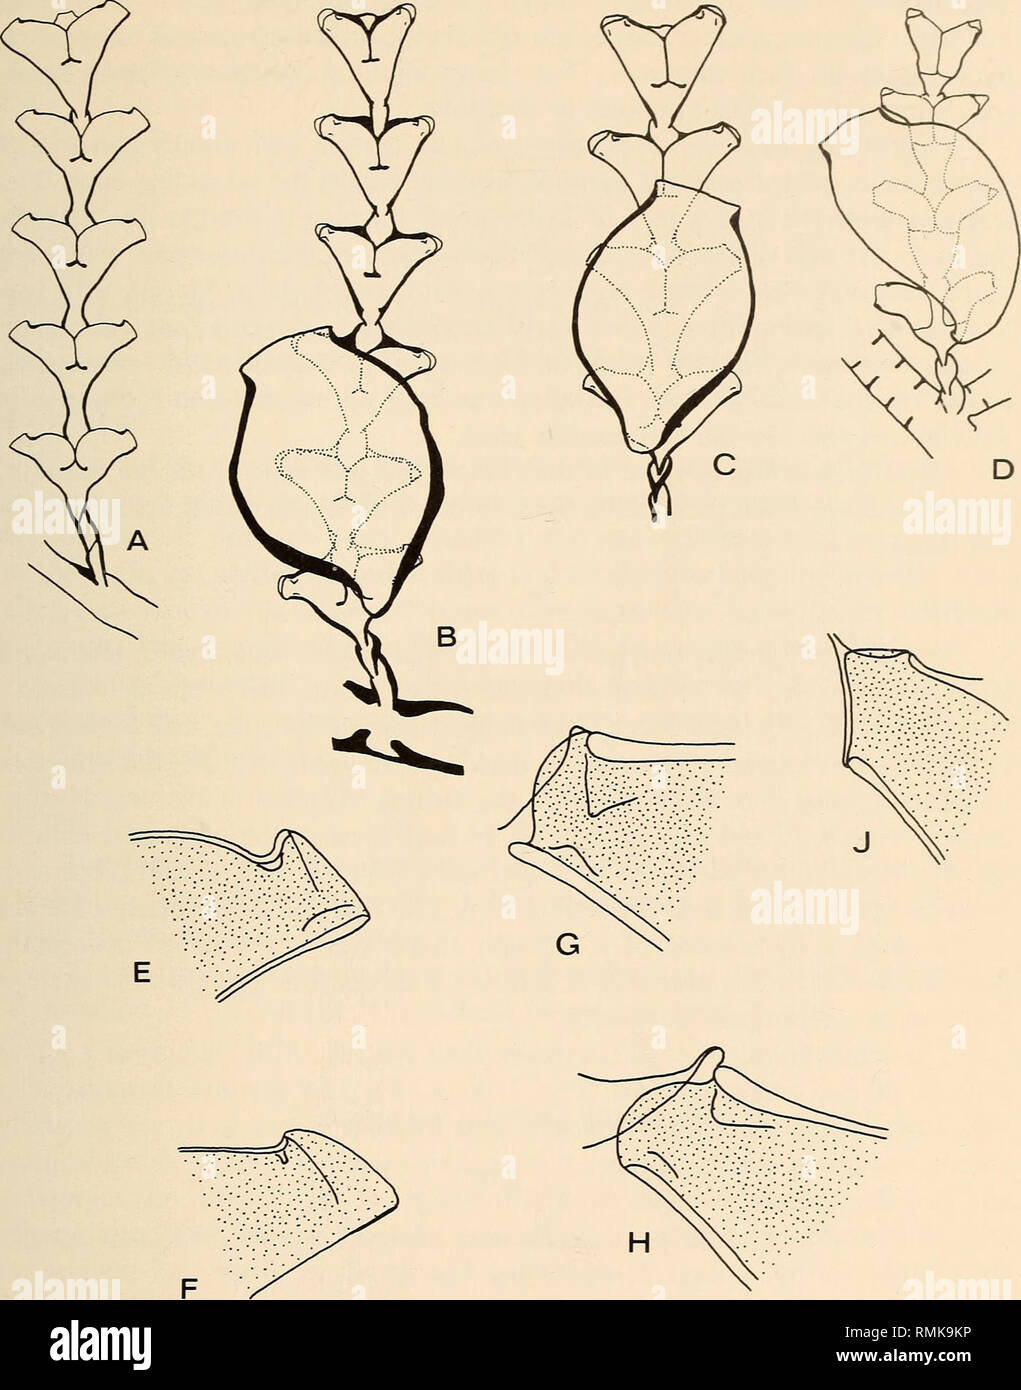 . Annals of the South African Museum = Annale van die Suid-Afrikaanse Museum. Natural history. A COLLECTION OF HYDROIDS FROM MOZAMBIQUE, EAST AFRICA 29. Fig. 7. A, E-F. Sertularia laevimarginata Ritchie, holotype (E and F from different stems). B, G. Ser- tularia linealis Warren, holotype. C, H. Abietinaria laevimarginata, from Inhaca. D, J. Sertularia longa, from Inhaca. (In E-J the distal part of the hydrotheca is drawn without the near wall to show details of internal teeth and operculum.). Please note that these images are extracted from scanned page images that may have been digitally enh Stock Photo